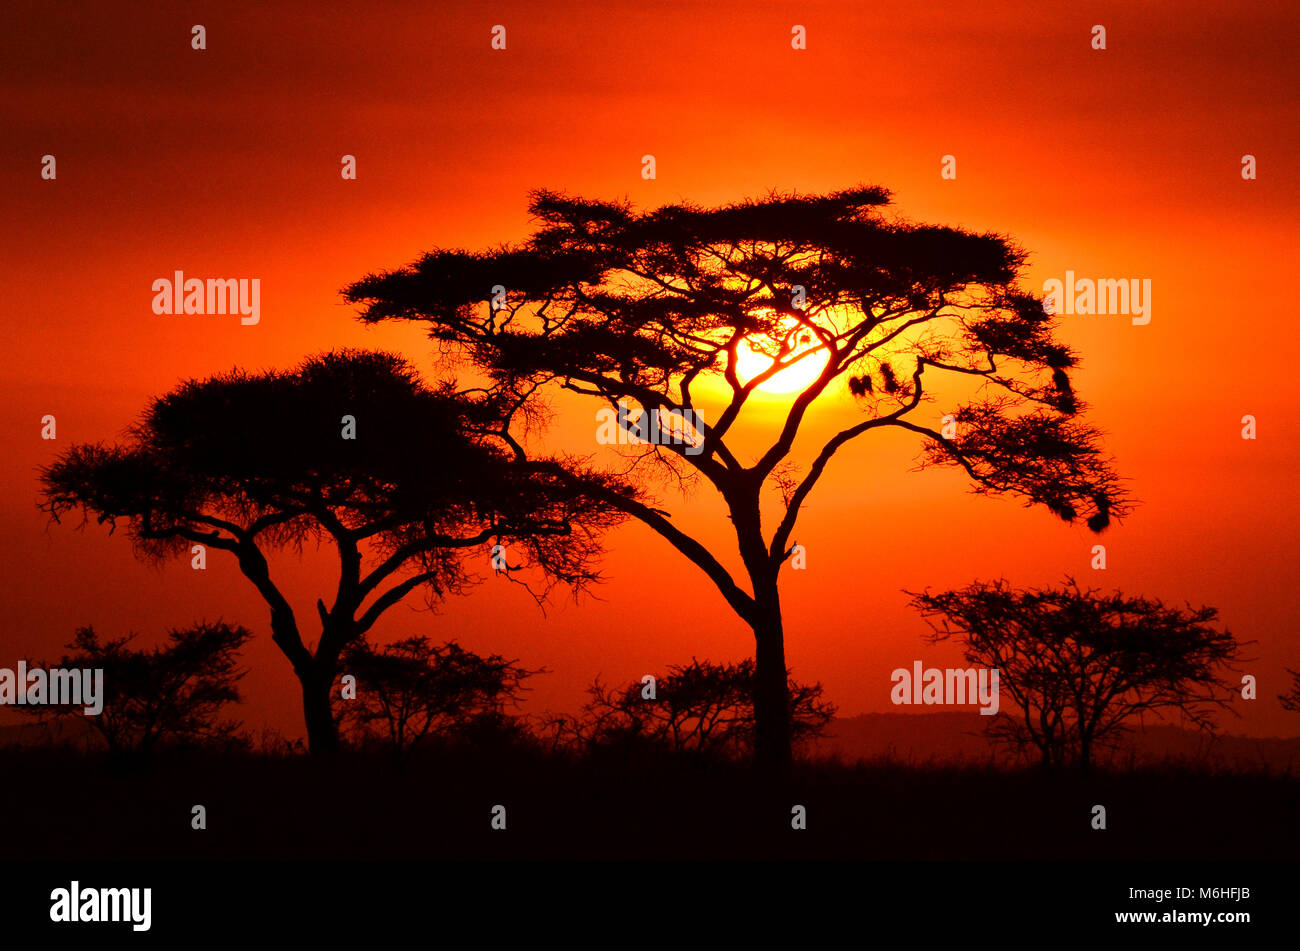 Serengeti National Park in Tanzania, is one of the most spectacular wildlife destinations on earth. Acacia Tortilla silhoutte against smoky red sunset. Stock Photo